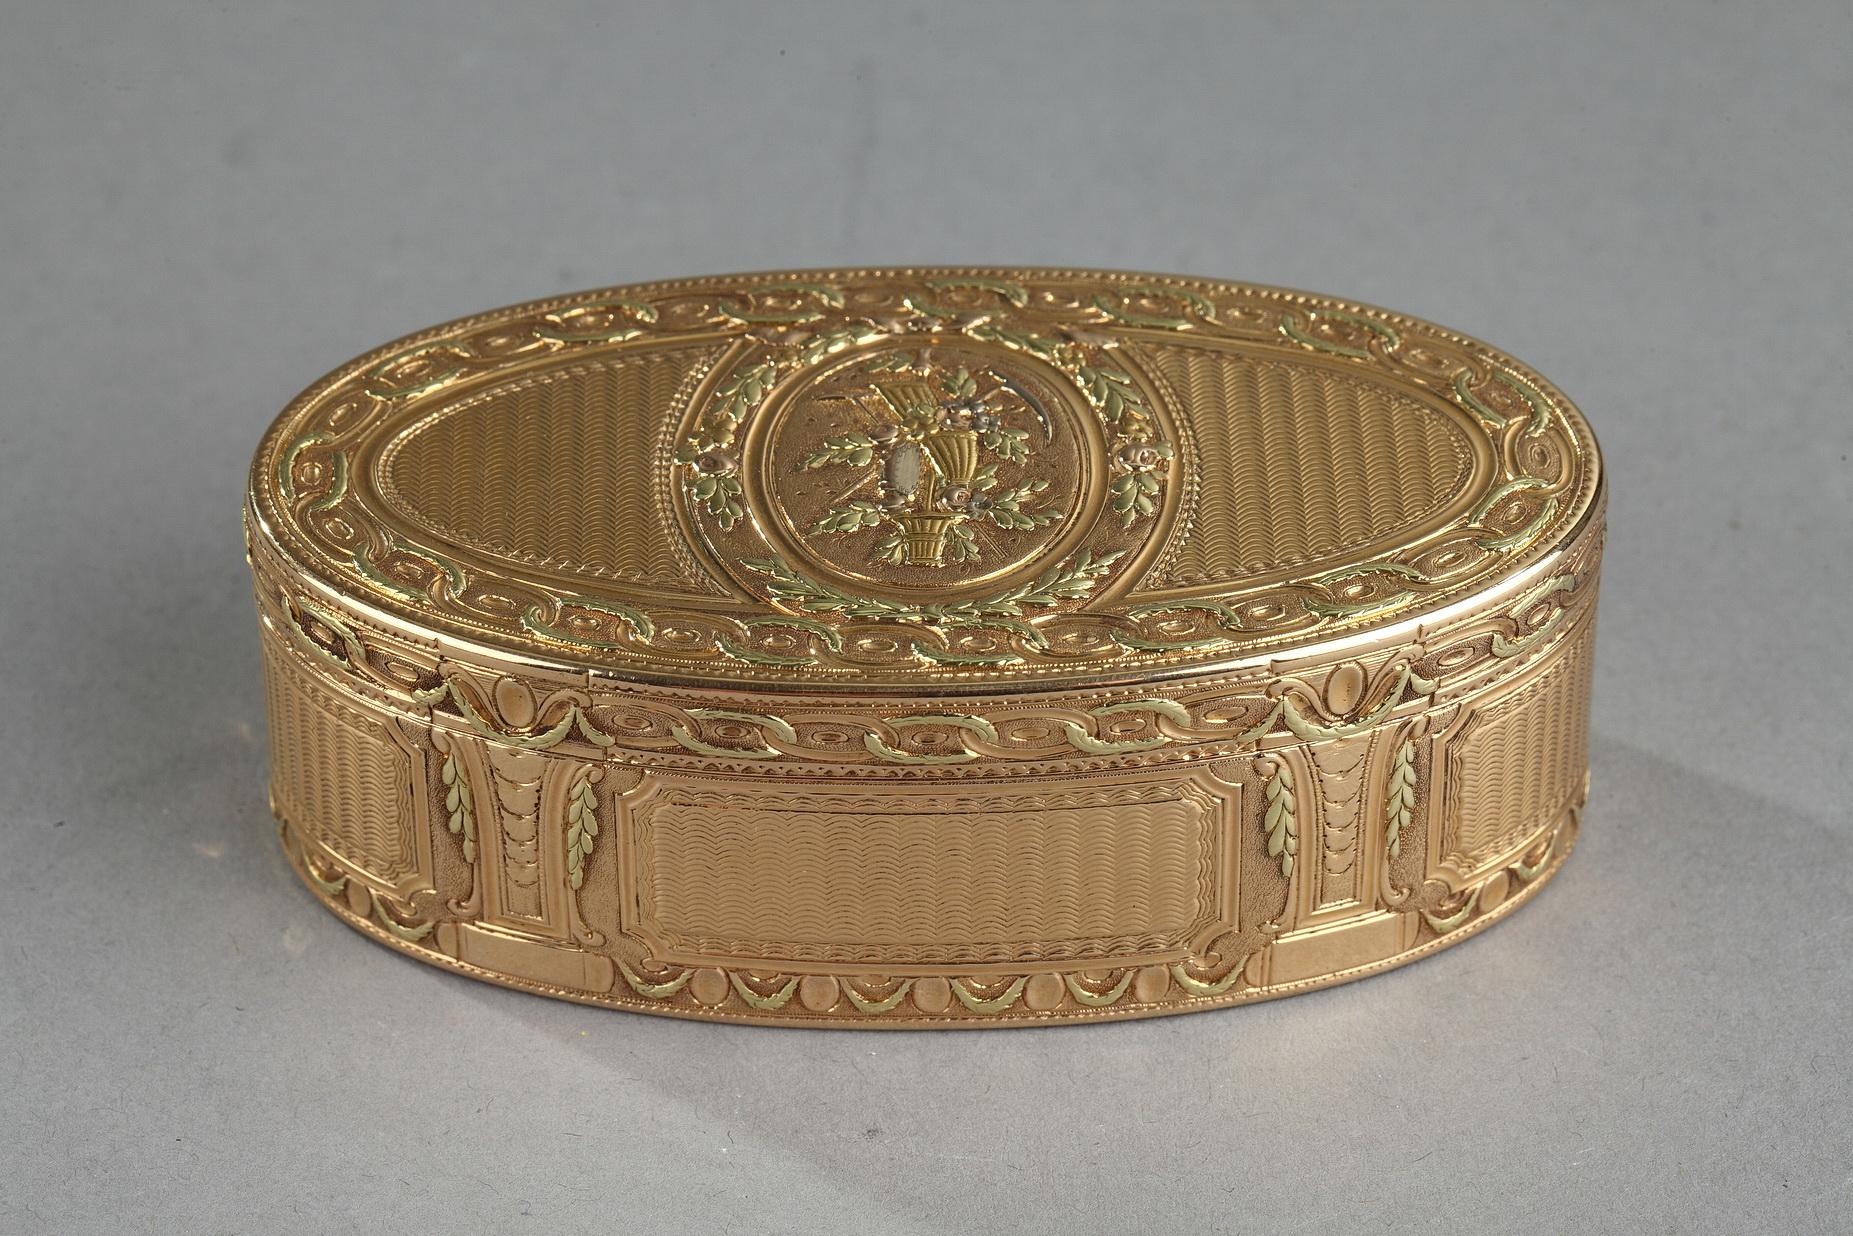 Three-tones gold oval snuff box. The hinged lid is decorated with a country trophy medallion. The medallion is framed by a garland of green gold foliage and roses. The medallion is detached on a guilloché. The borders of the lid and the box are